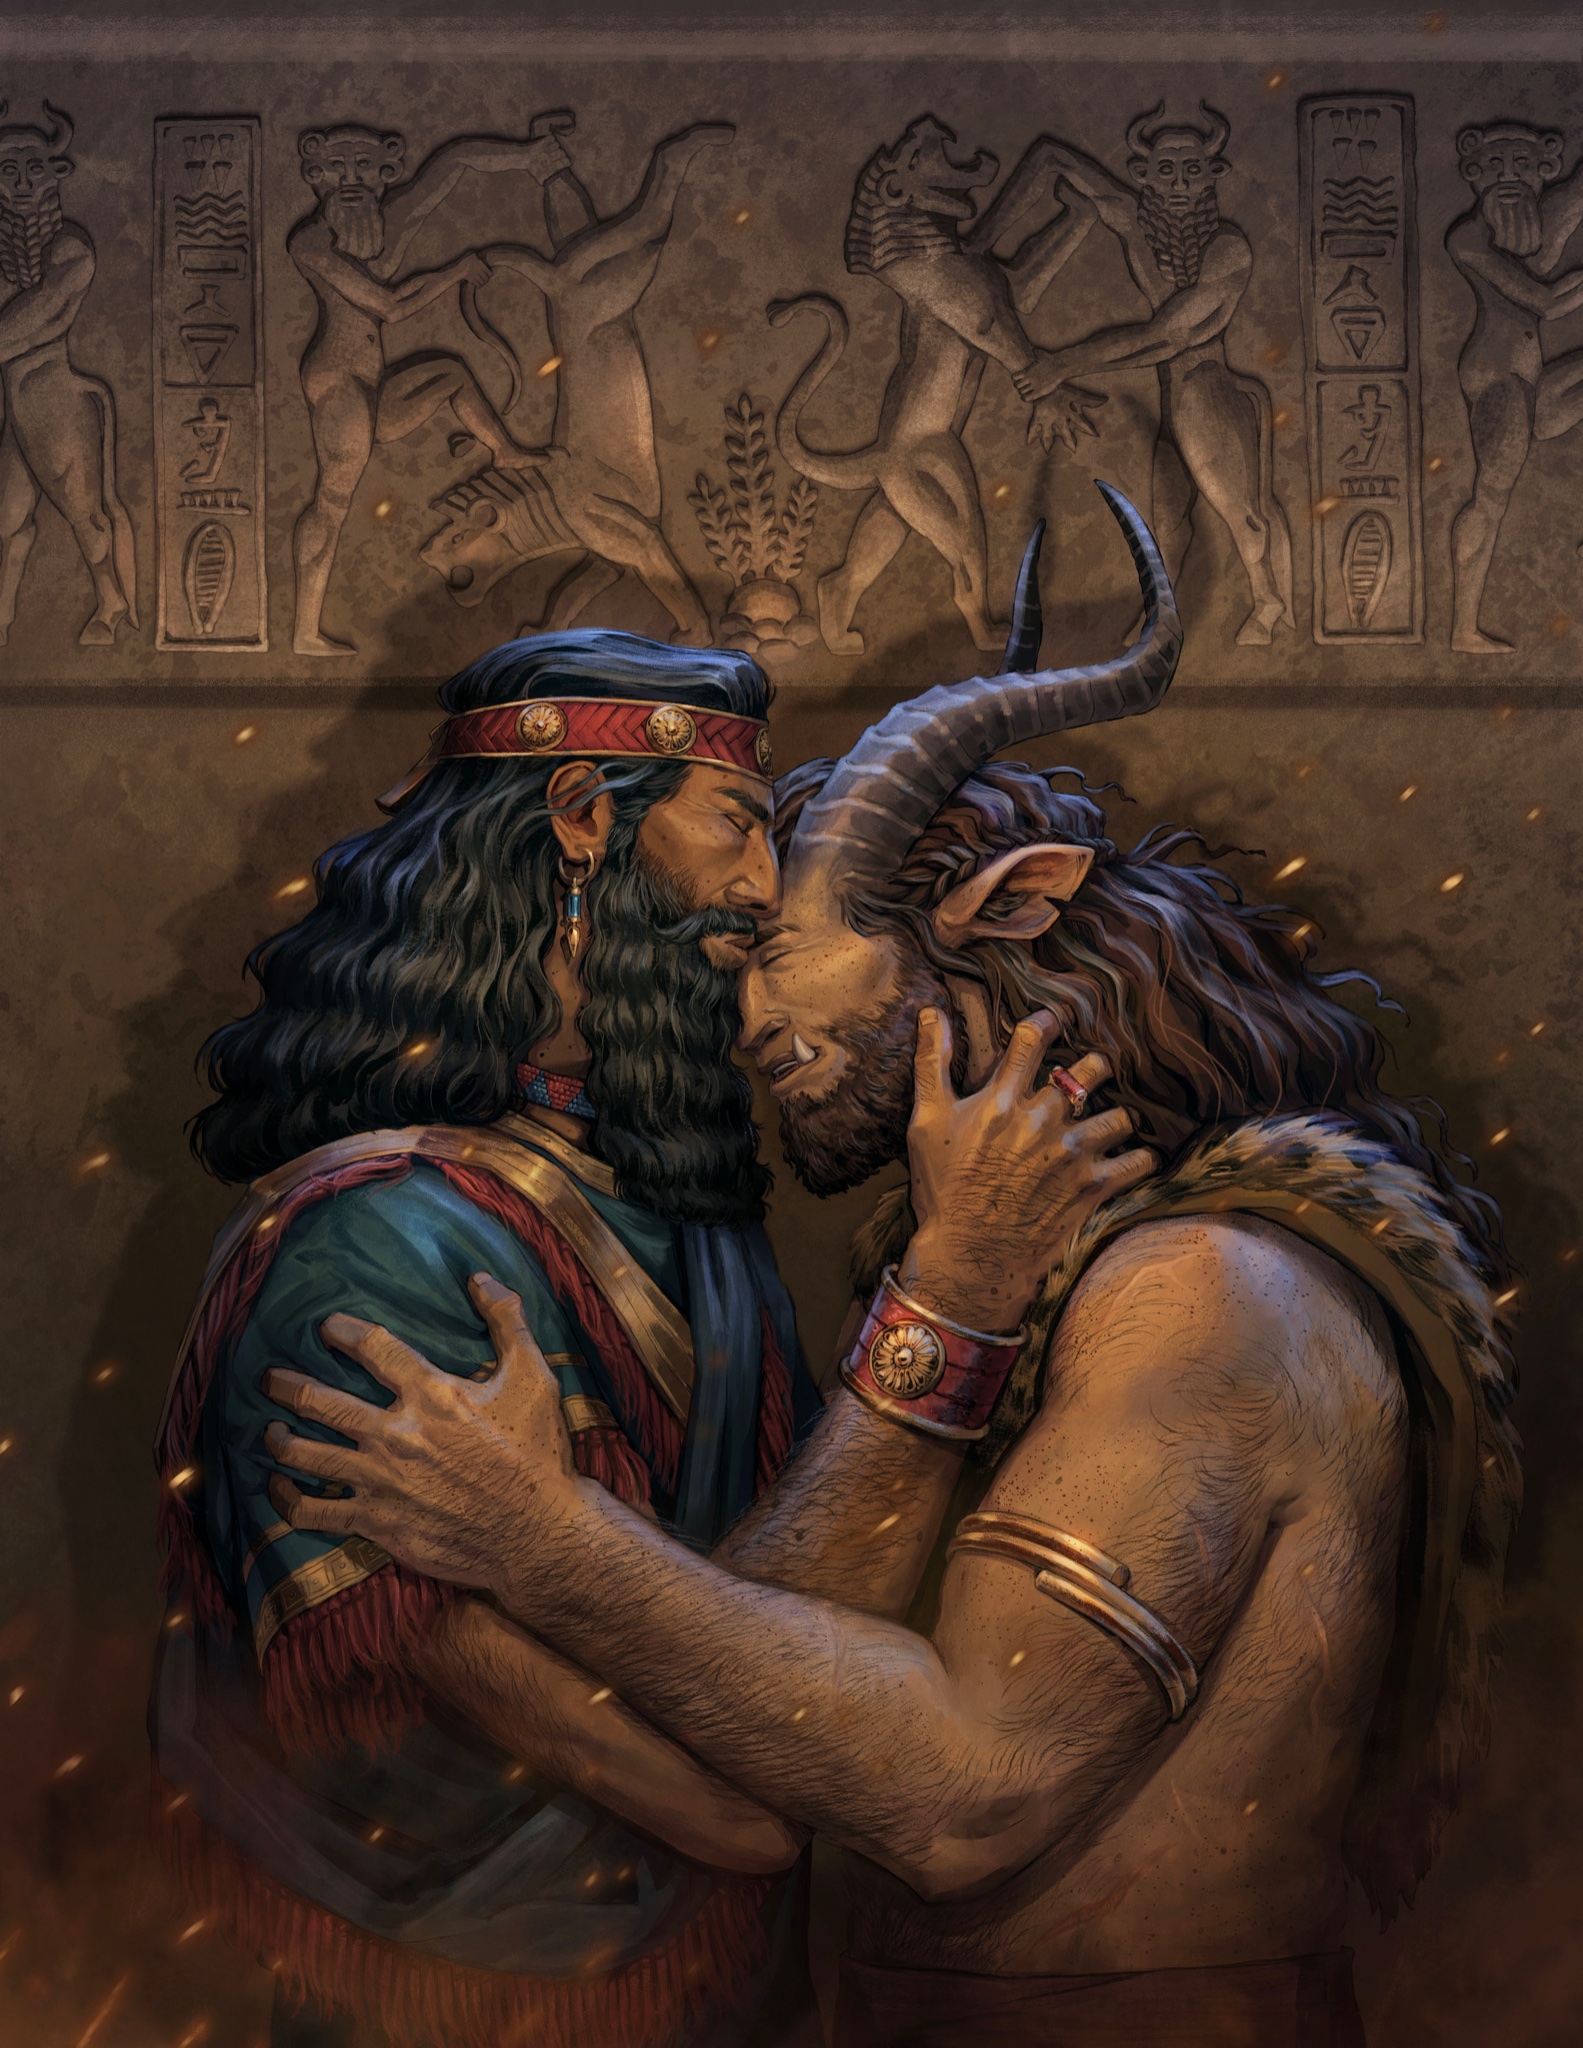 Kiana Hamm on Twitter: "Gilgamesh & Enkidu, done for the “Classics, but  make it gay” zine. Thank you to the mods for letting me stray from the  prompt a bit and paint